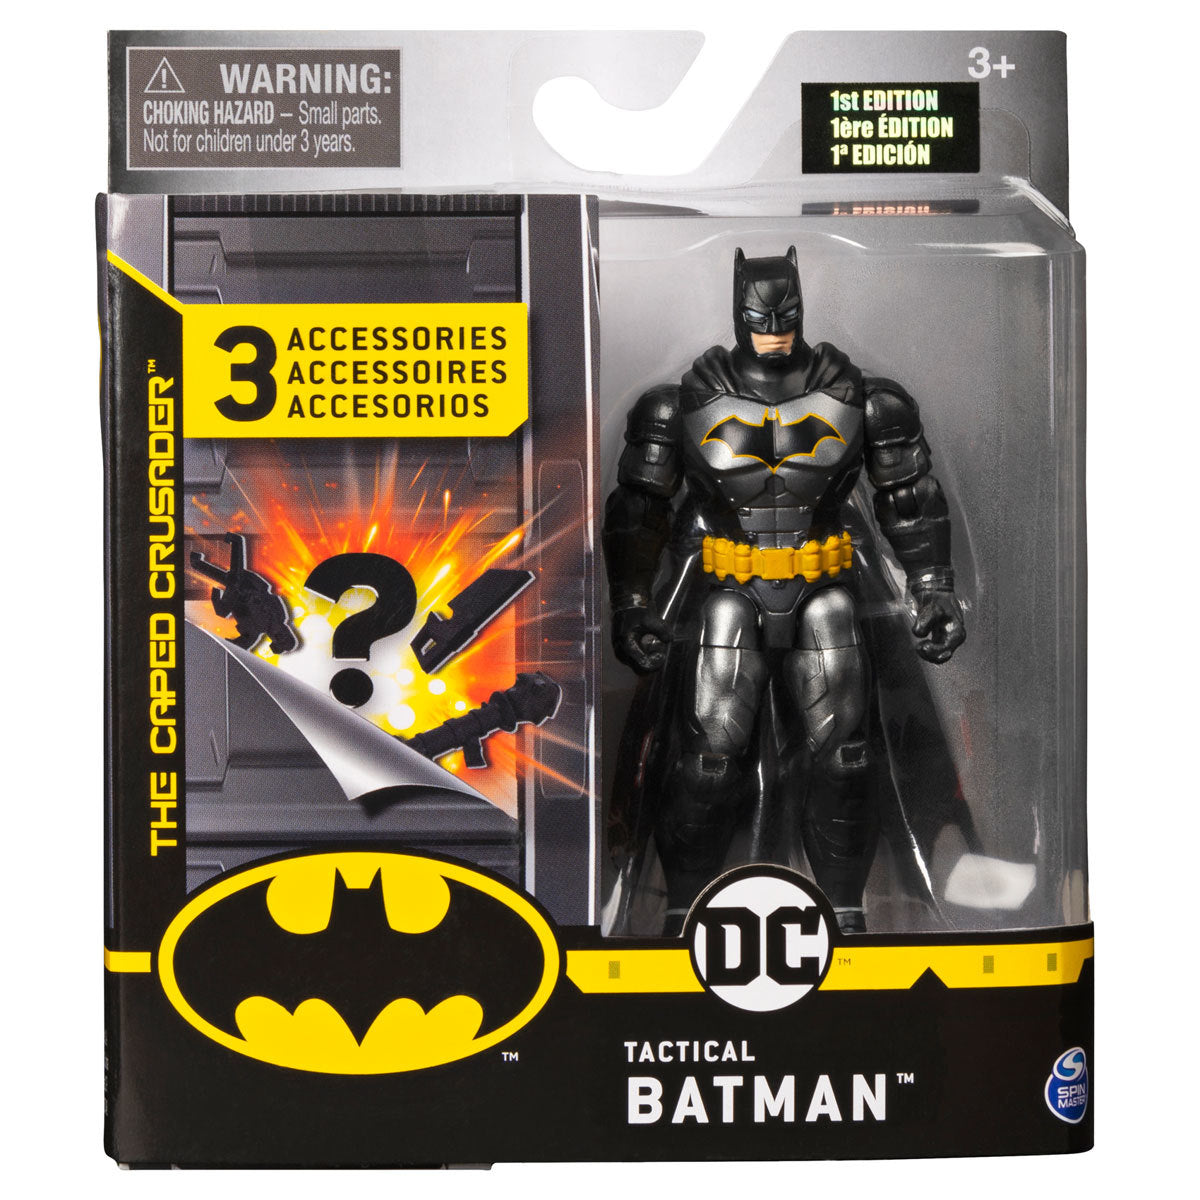 DC Comics The Caped Crusader 10cm Figure with 3 Mystery Accessories - Batman